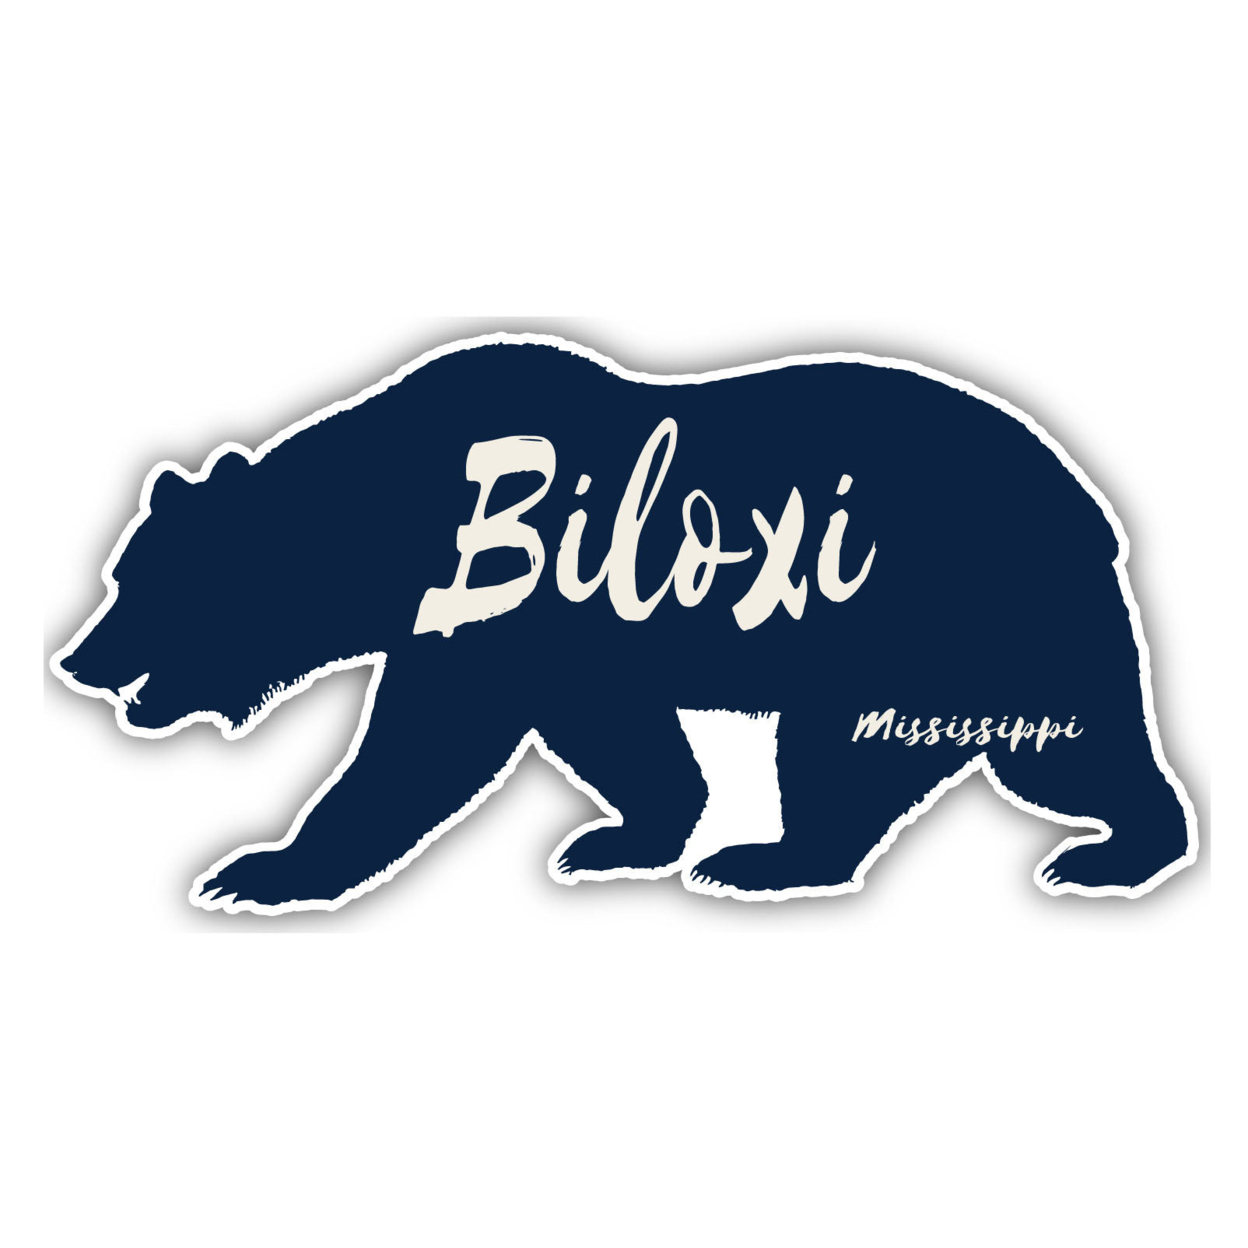 Biloxi Mississippi Souvenir Decorative Stickers (Choose Theme And Size) - 4-Pack, 8-Inch, Tent